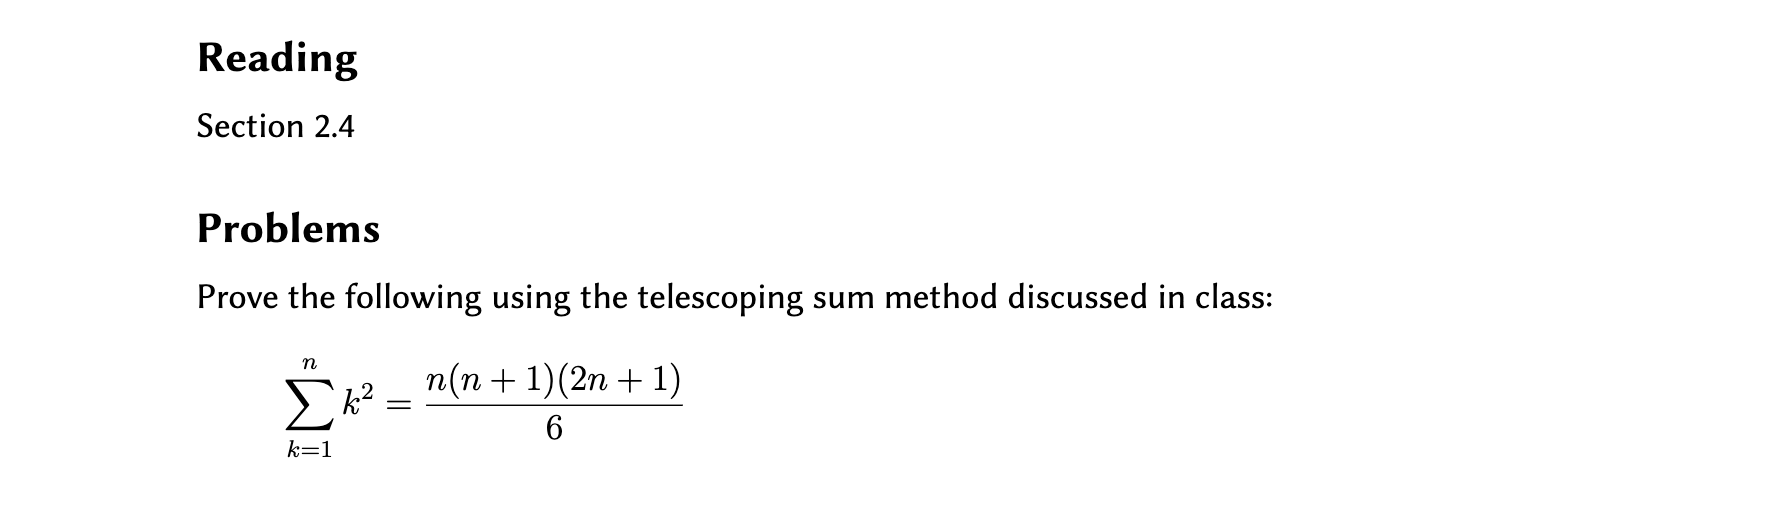 Reading
Section 2.4
Problems
Prove the following using the telescoping sum method discussed in class:
n(n + 1)(2n + 1)
Σ
6.
k=1
